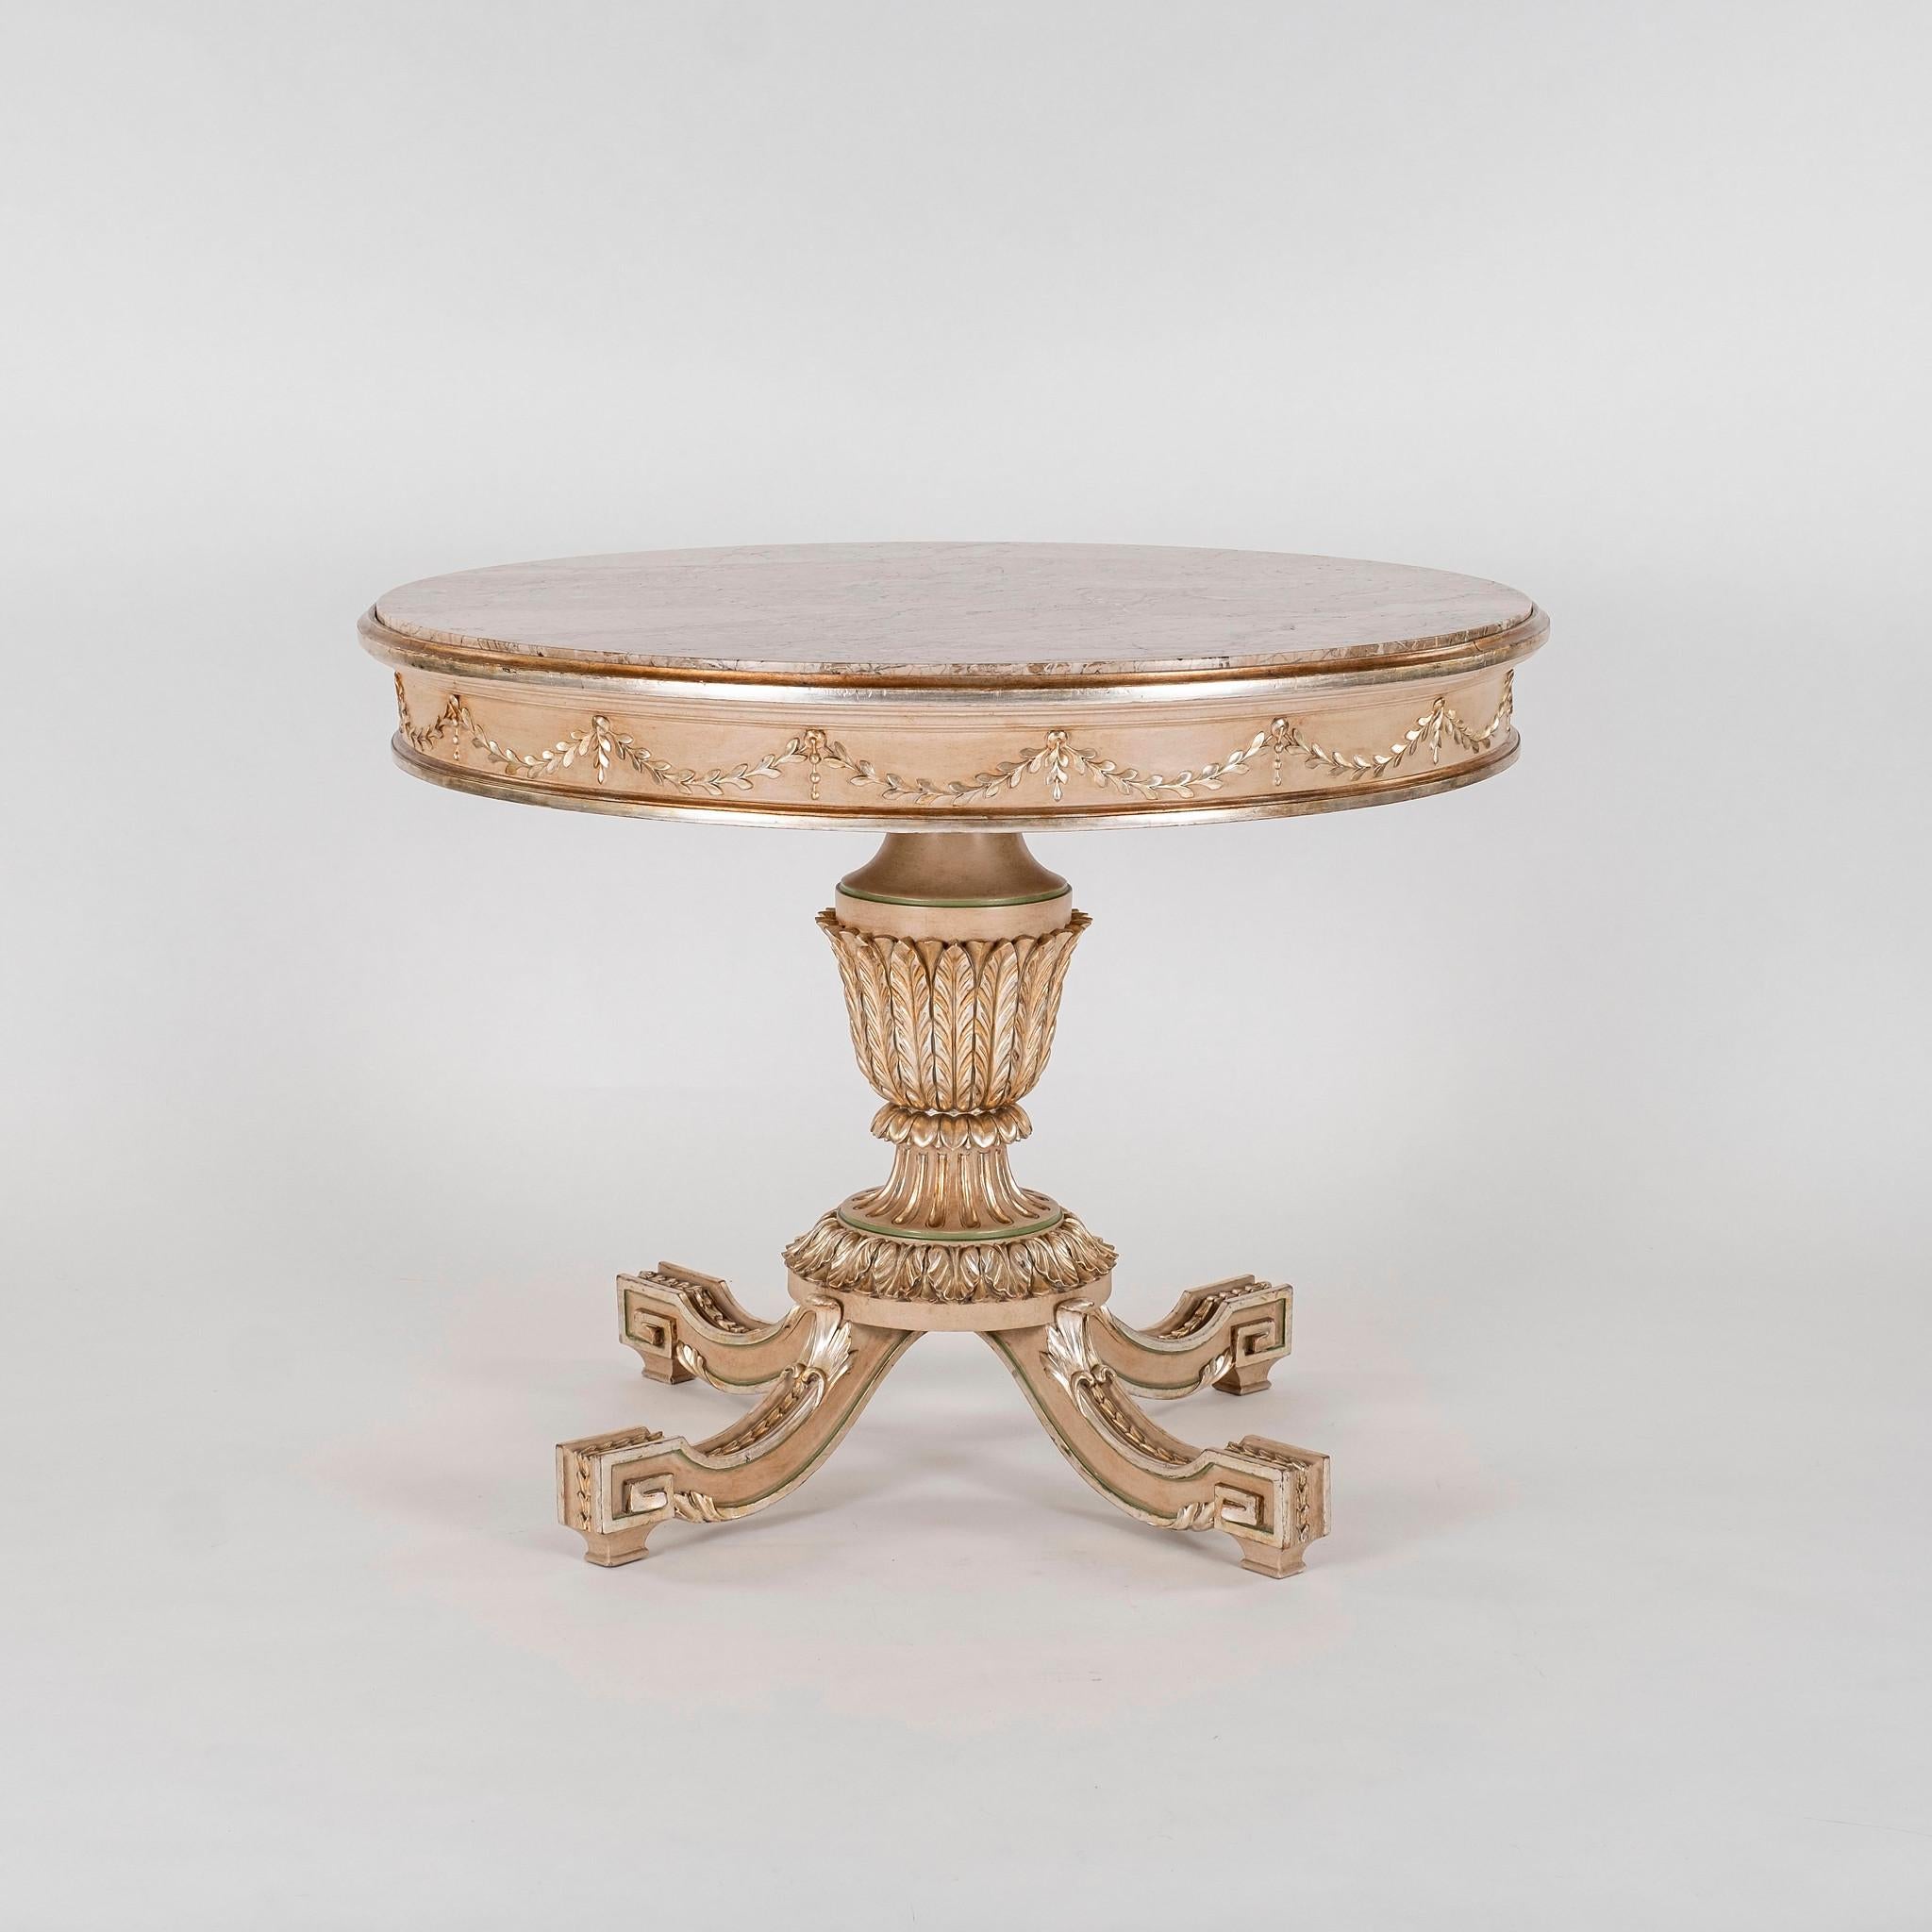 Italian Neoclassical Style Polychrome Giltwood Center Table For Sale